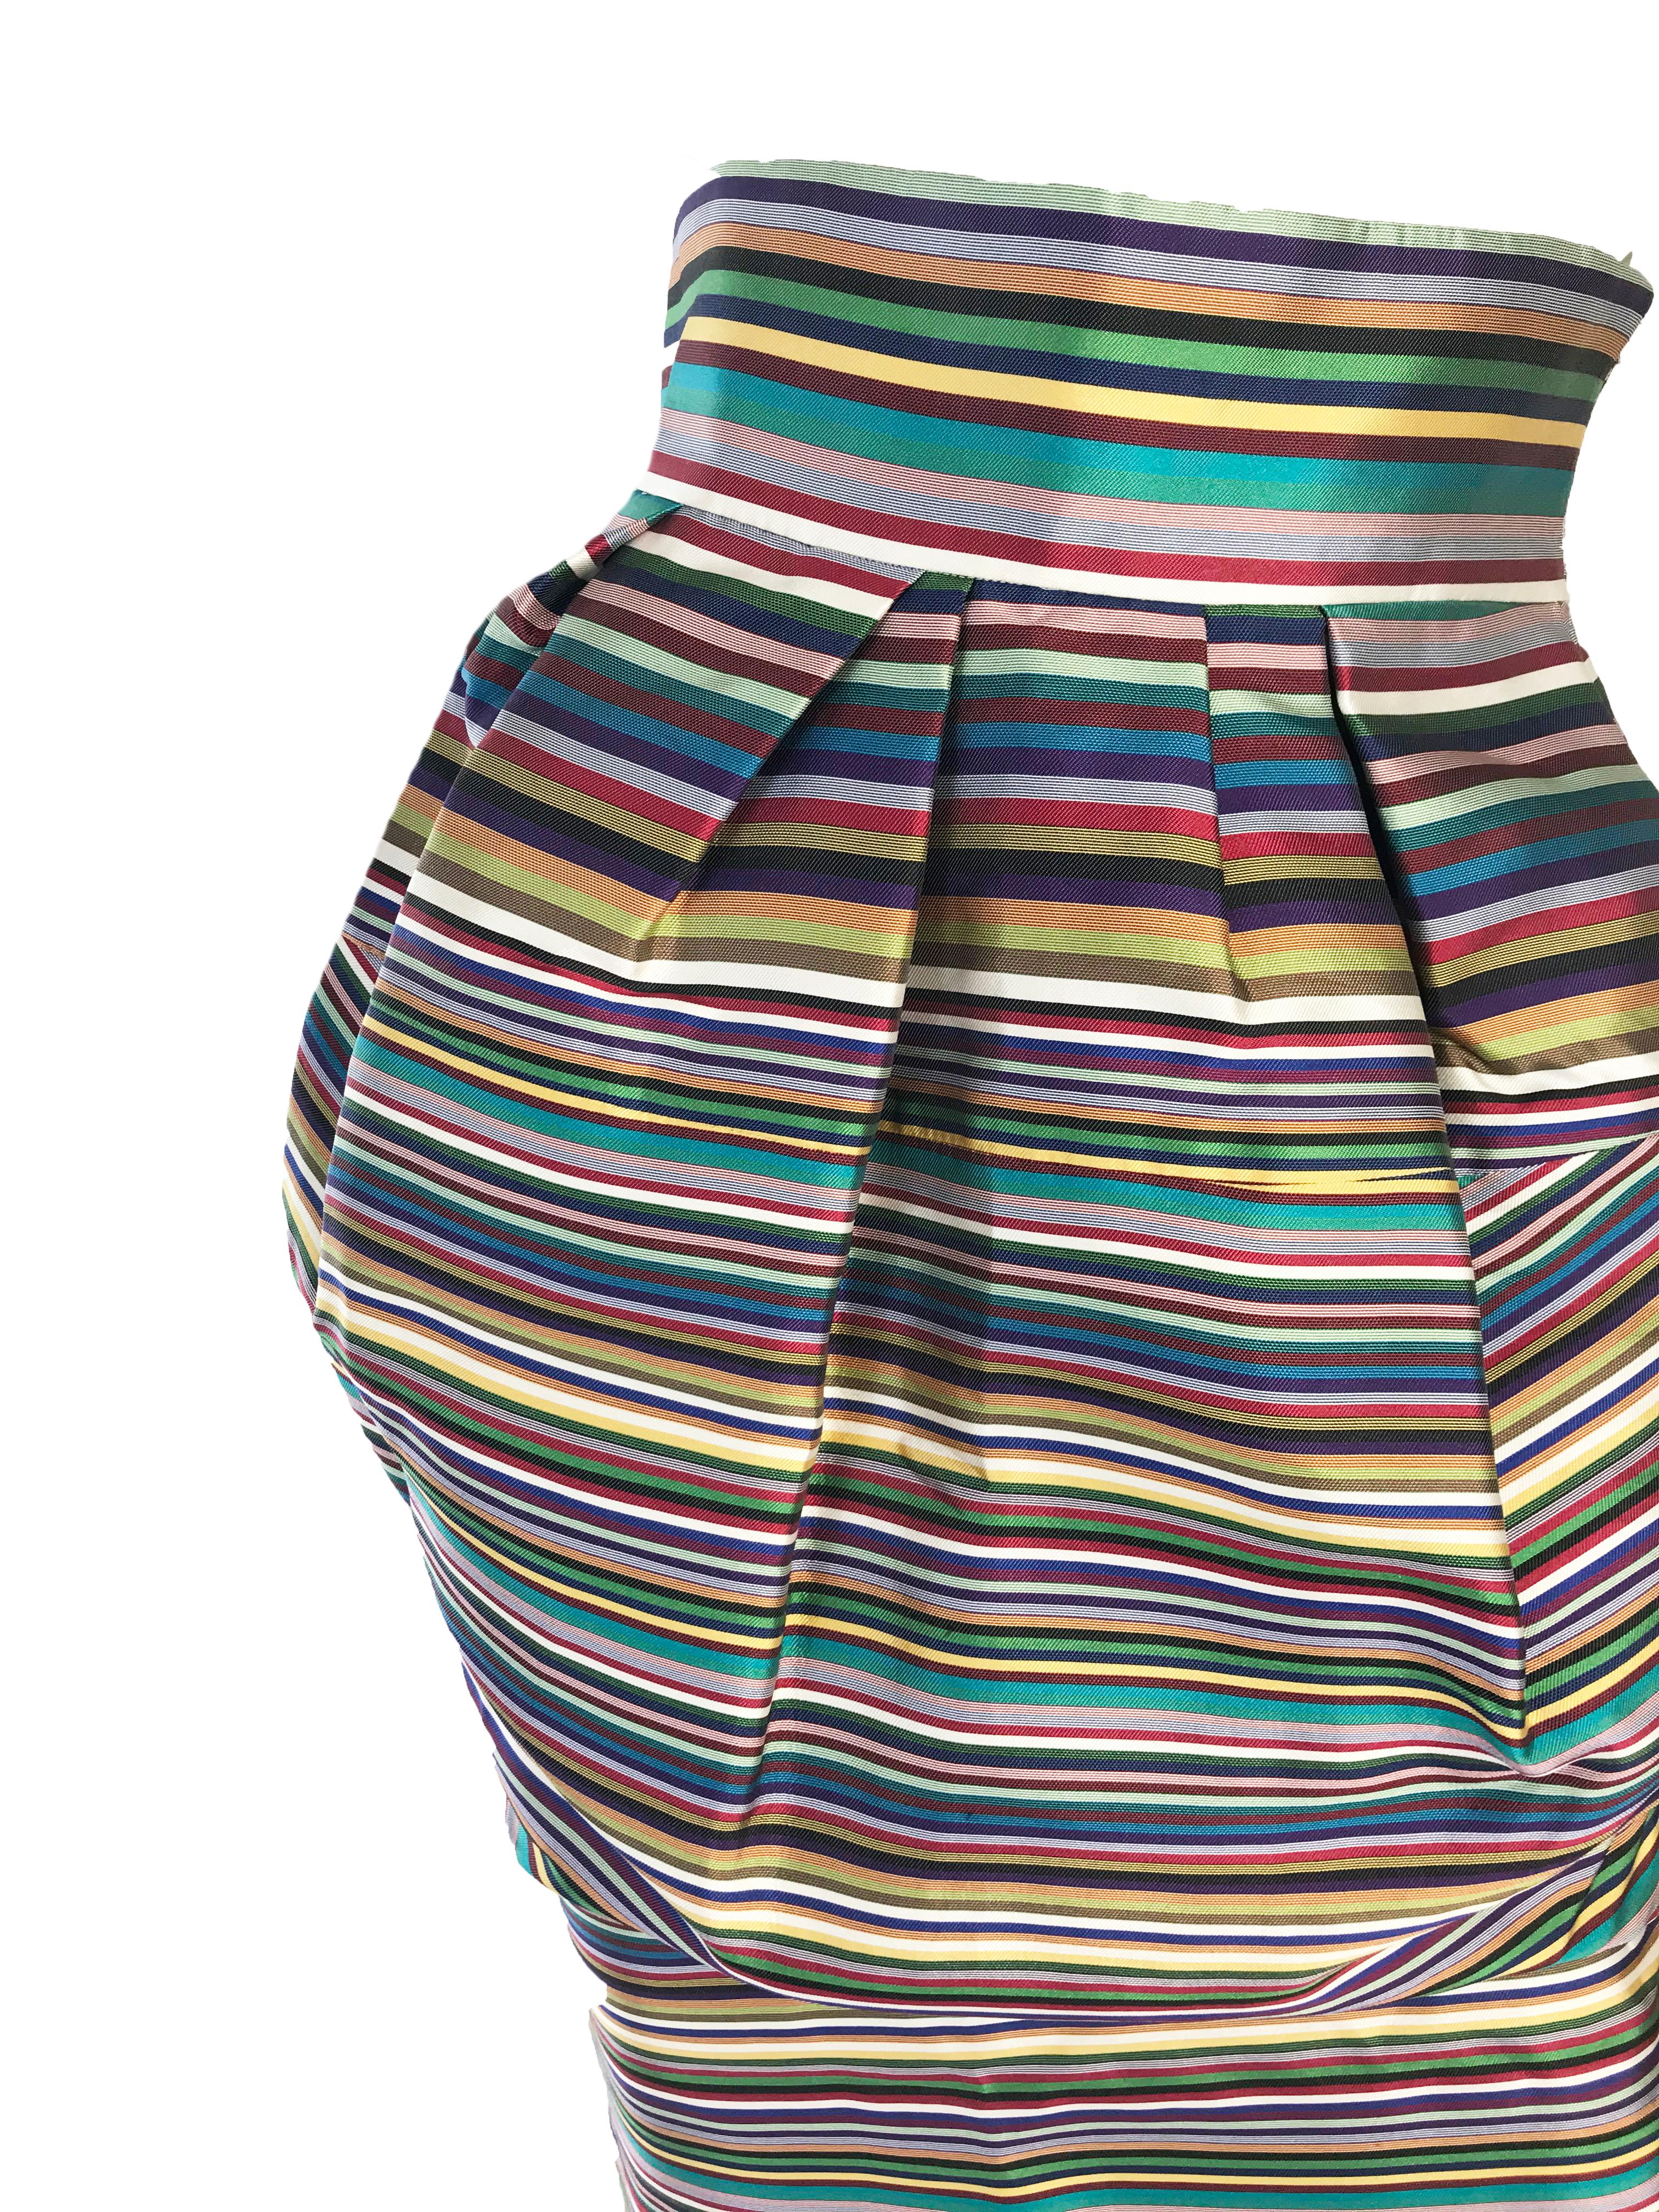 2014 Spring Christian Dior multicolored silk bubble skirt. Condition: Excellent. 
Size S 
28